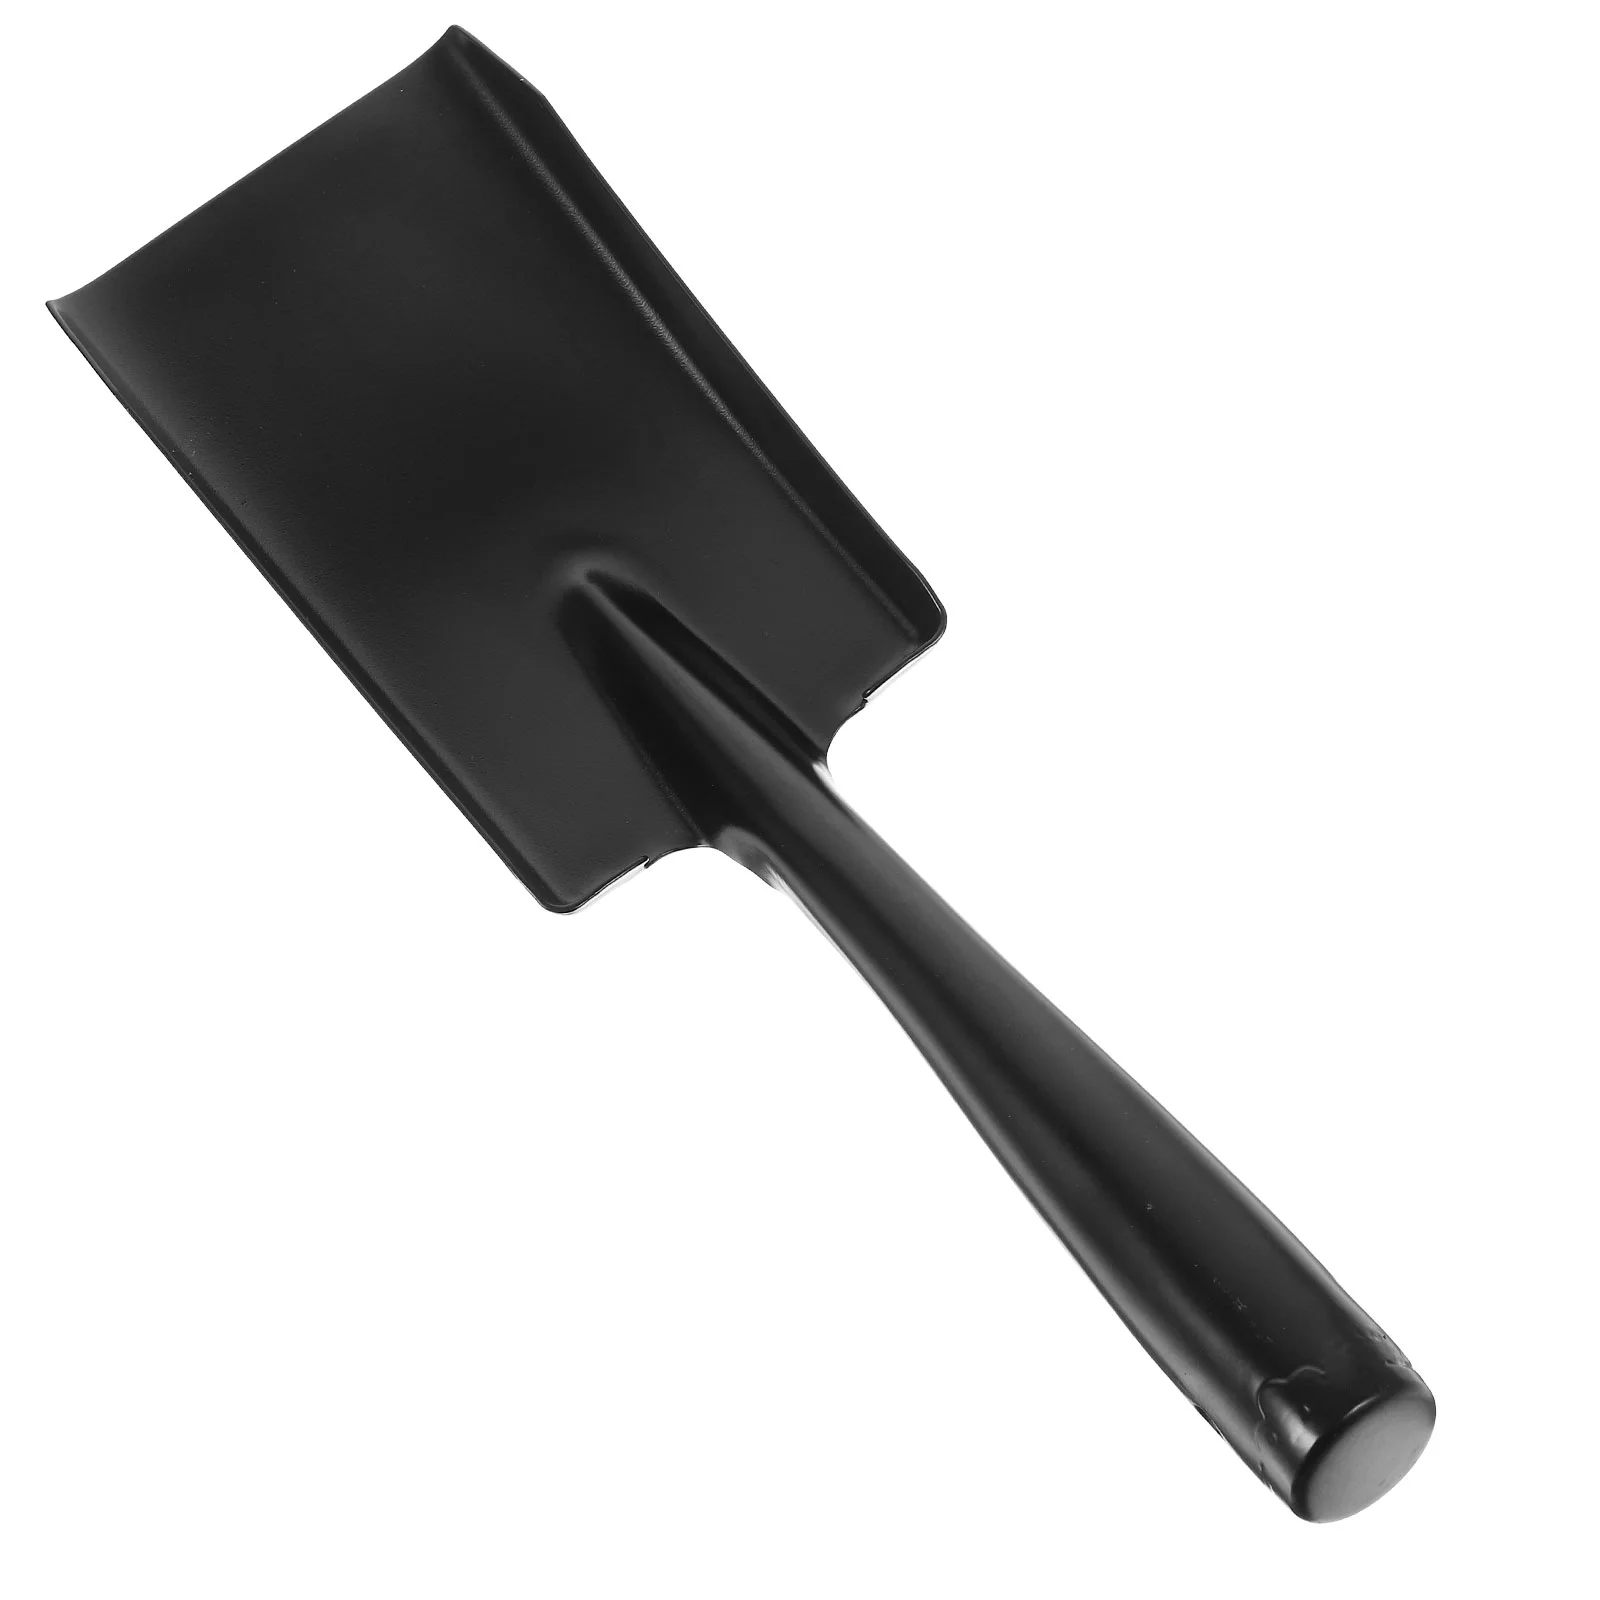 

Dustpan Gardening Beach Fireplace Manganese Steel Shovels for Snow Removal